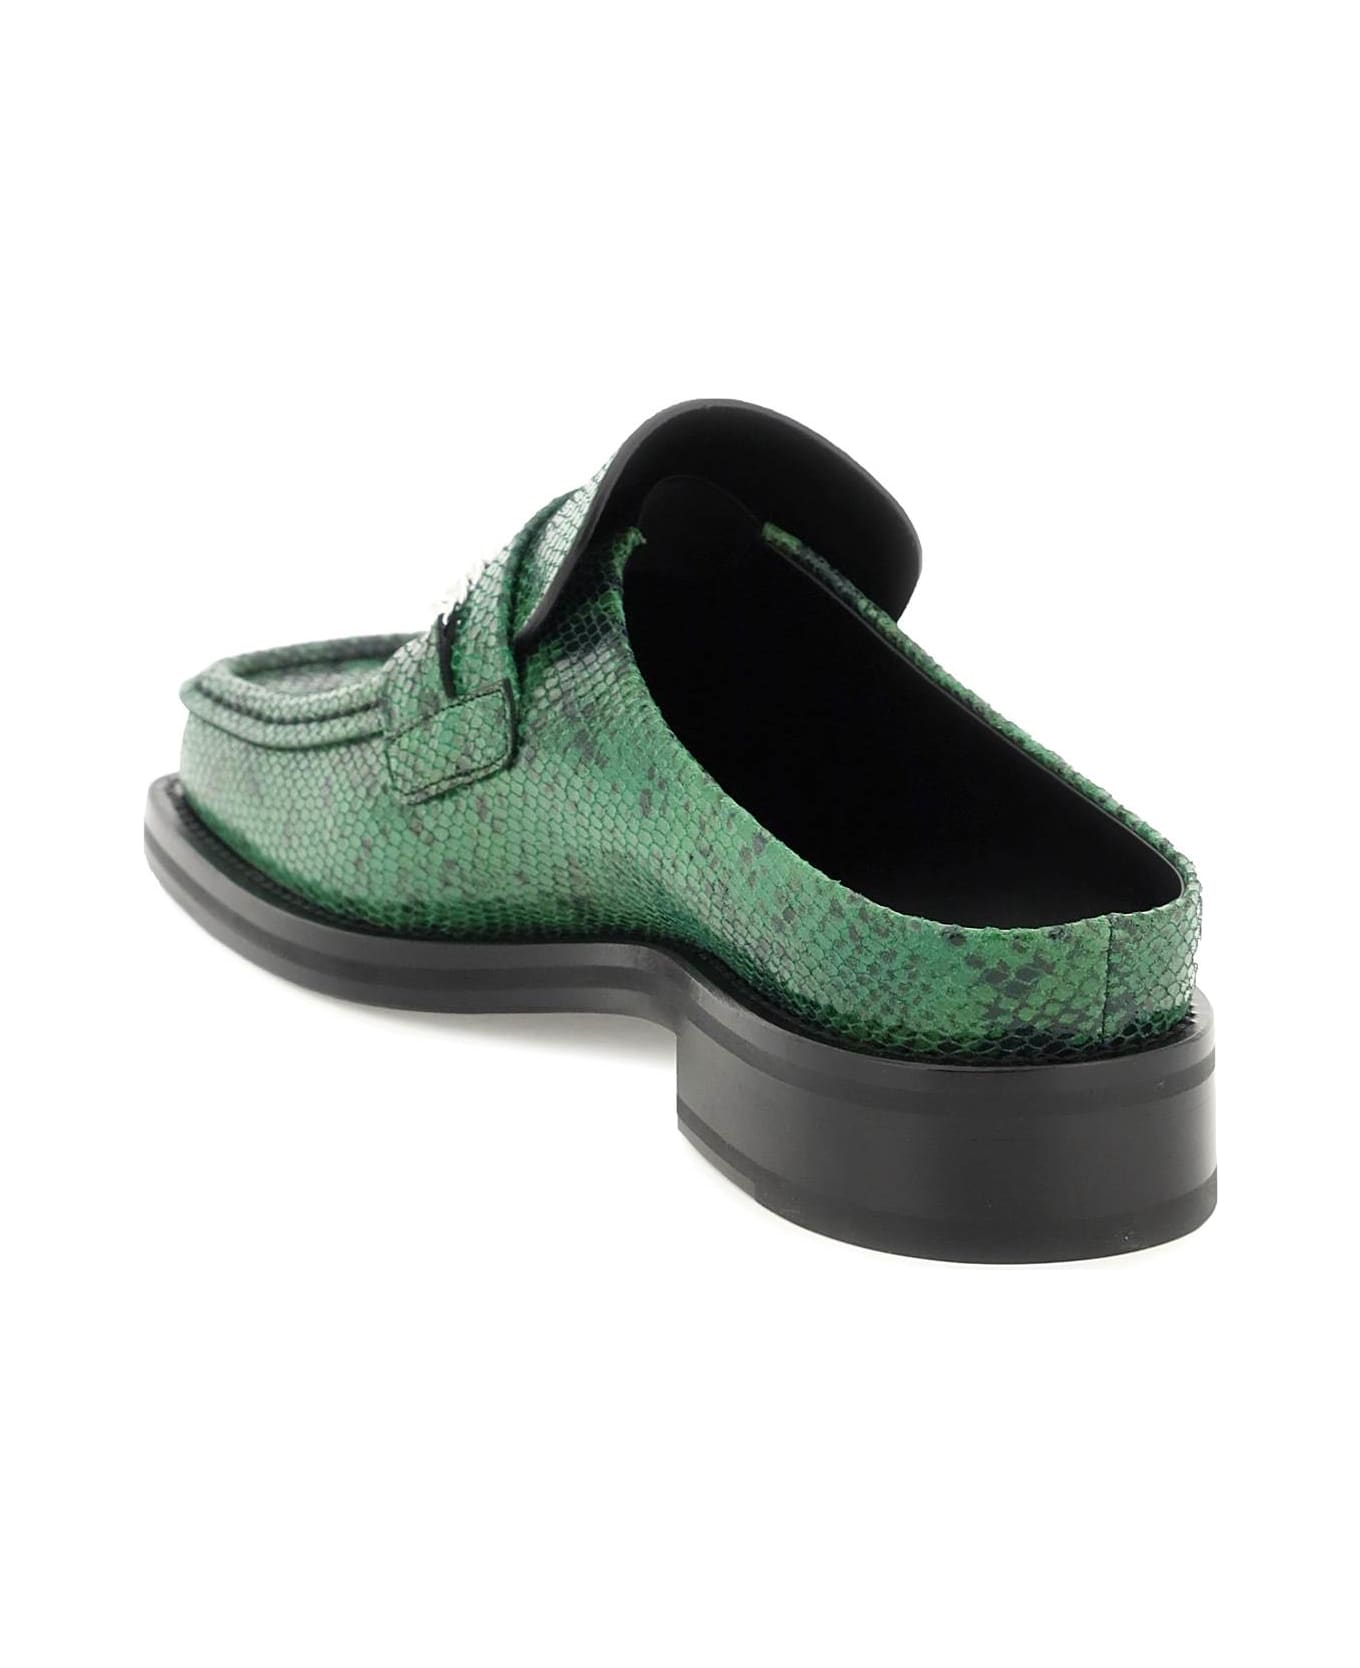 Martine Rose Piton-embossed Leather Loafers Mules - GREEN (Green)